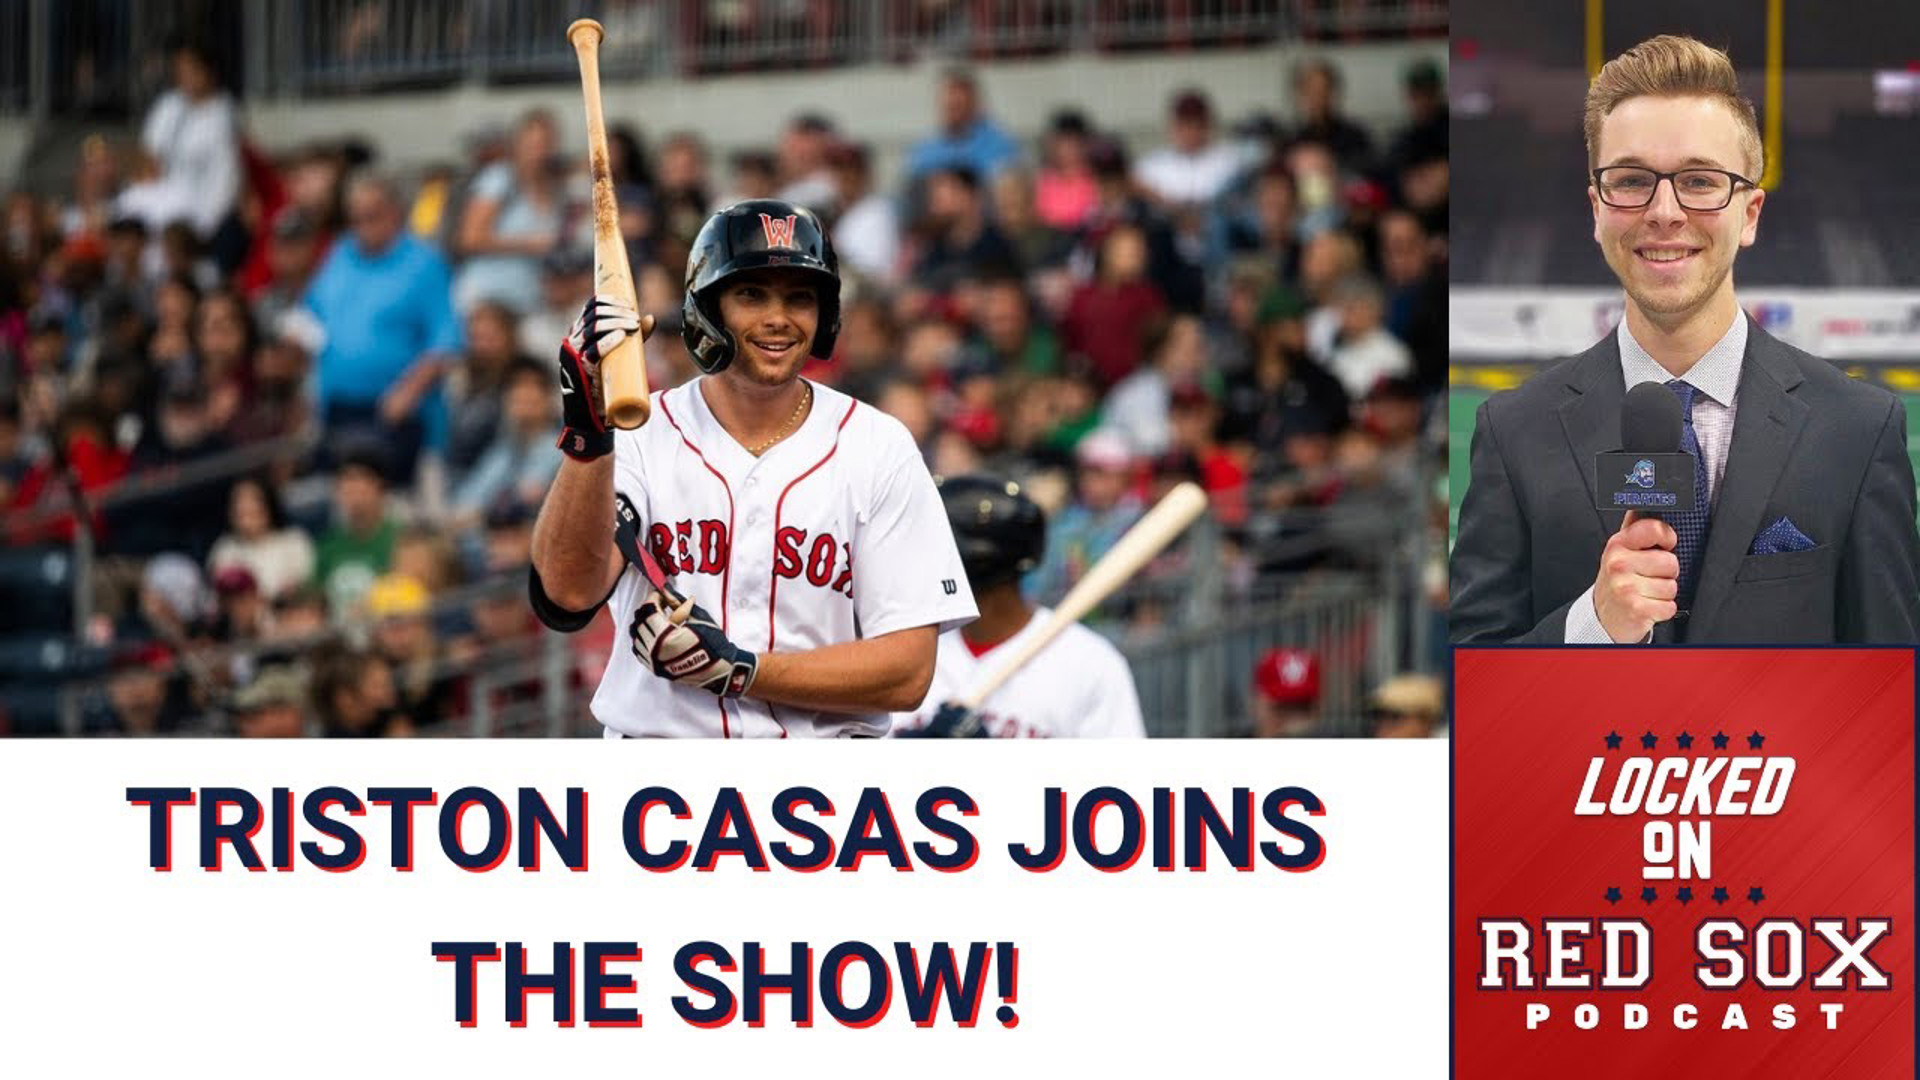 Triston Casas and Eric Hosmer went to same high school, trained together,  are now Red Sox teammates: 'It was meant to be' 